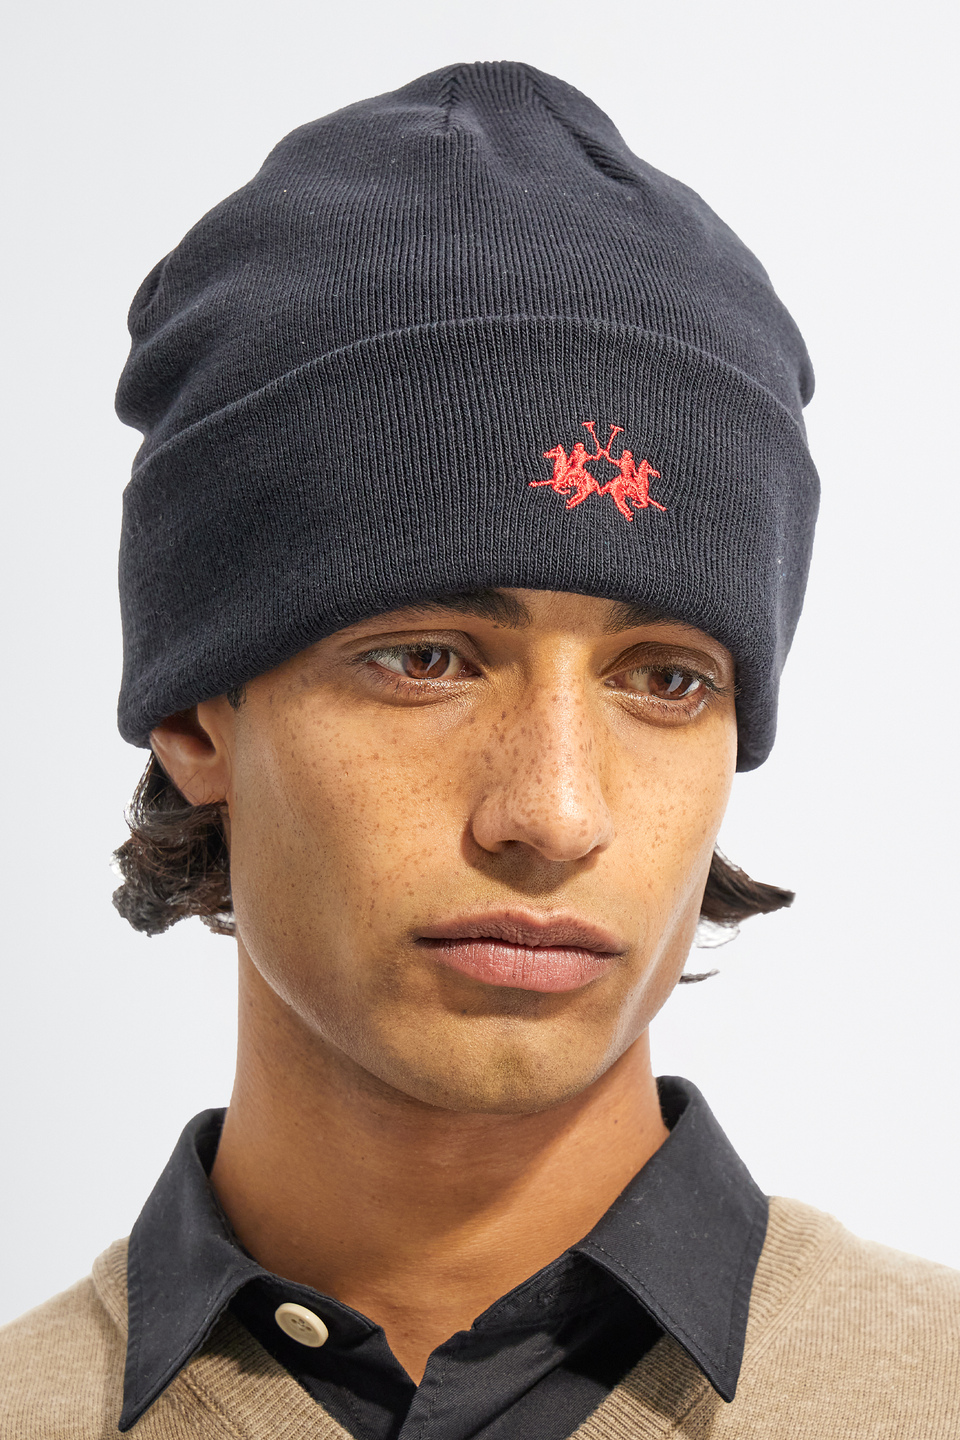 Beanie hat Essential in acrylic fabric | La Martina - Official Online Shop